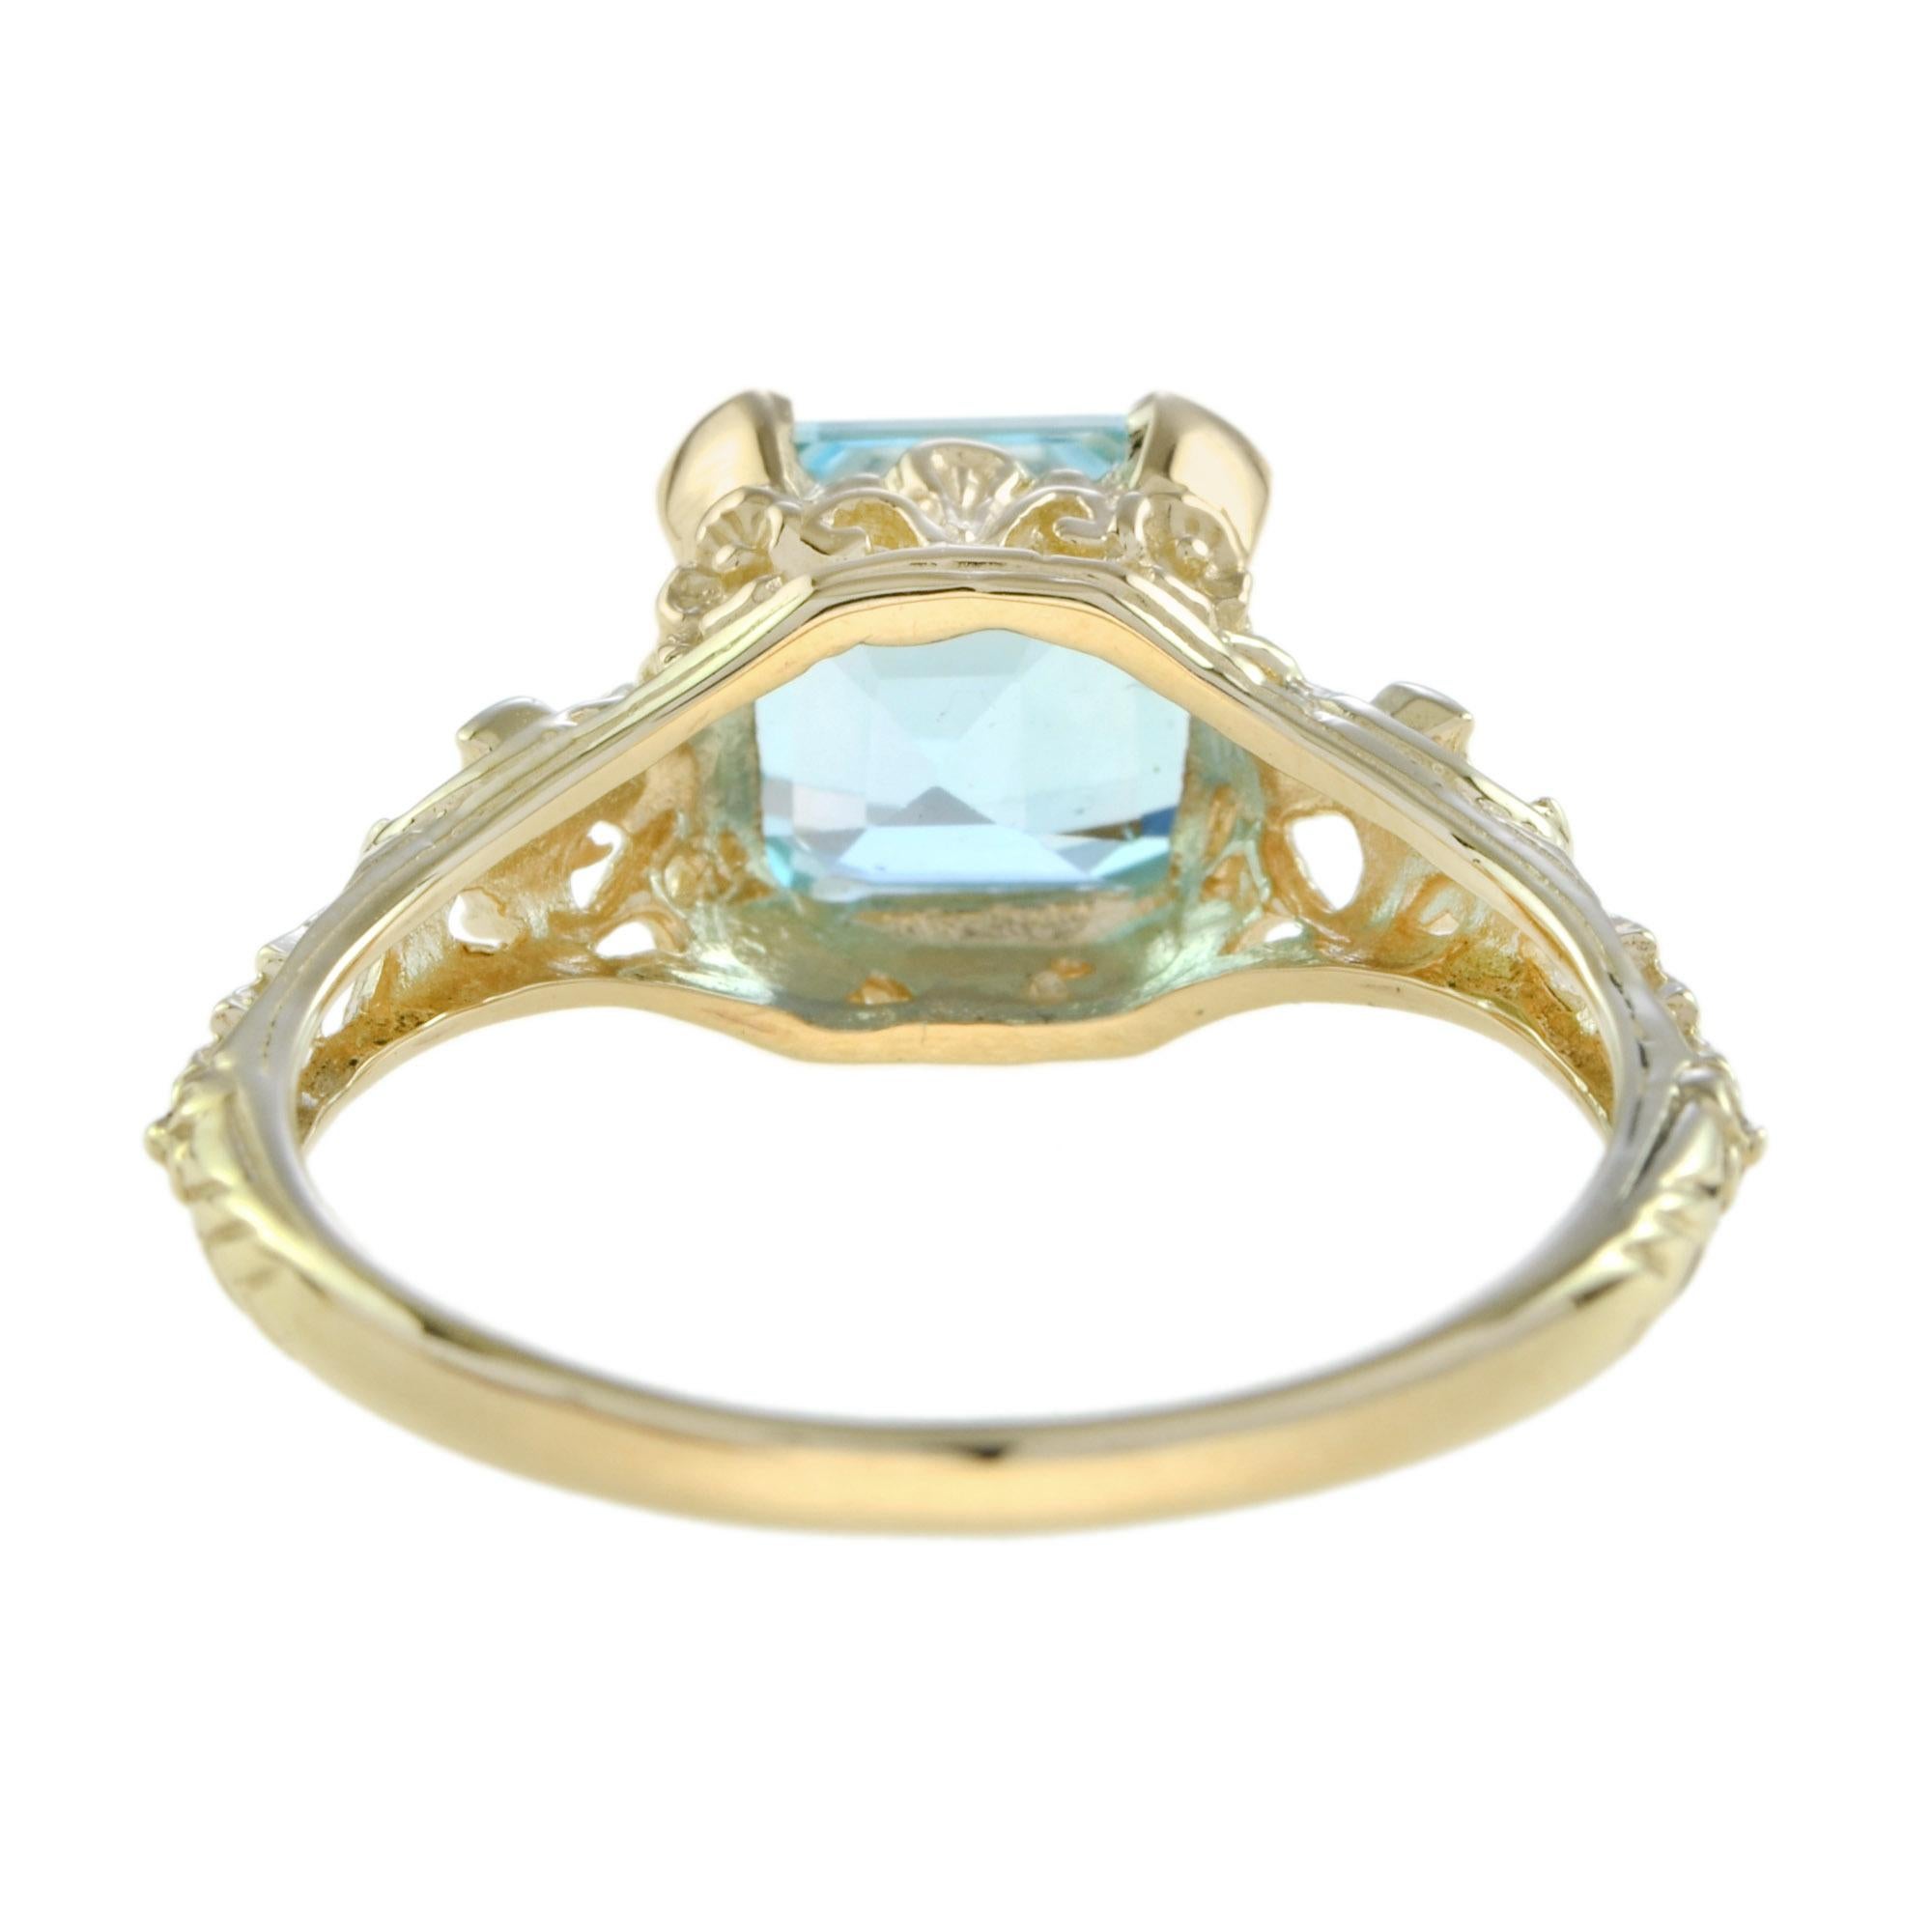 Women's Natural Blue Topaz Filigree Ring in Solid 14K Yellow Gold